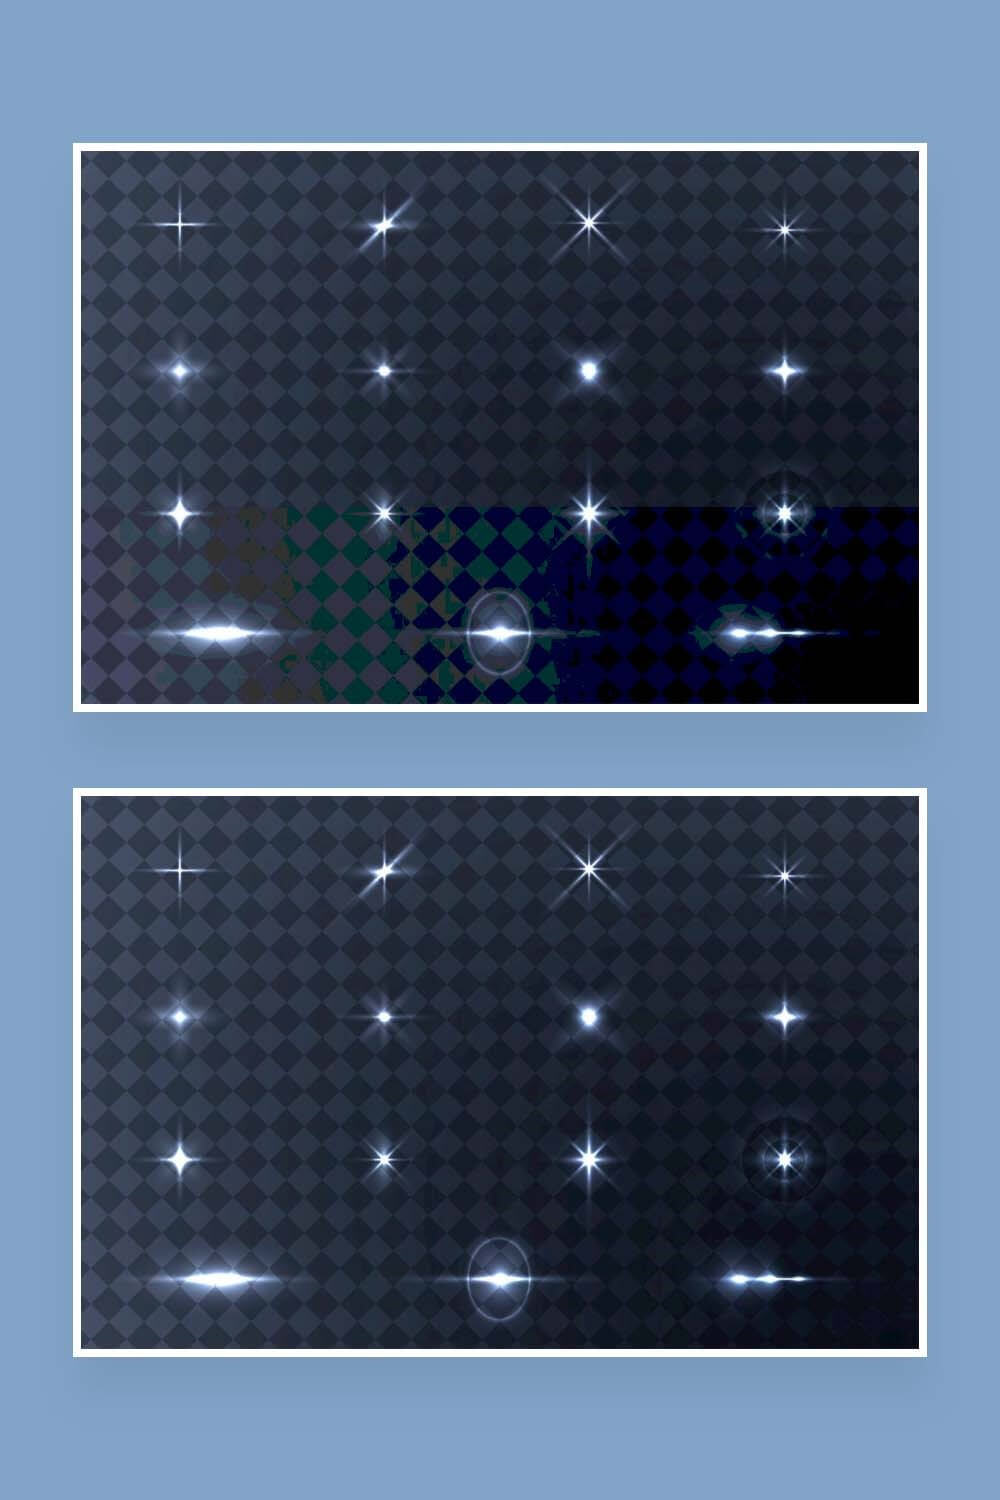 Two pictures depicting light effects on a diamond-shaped dark blue background.